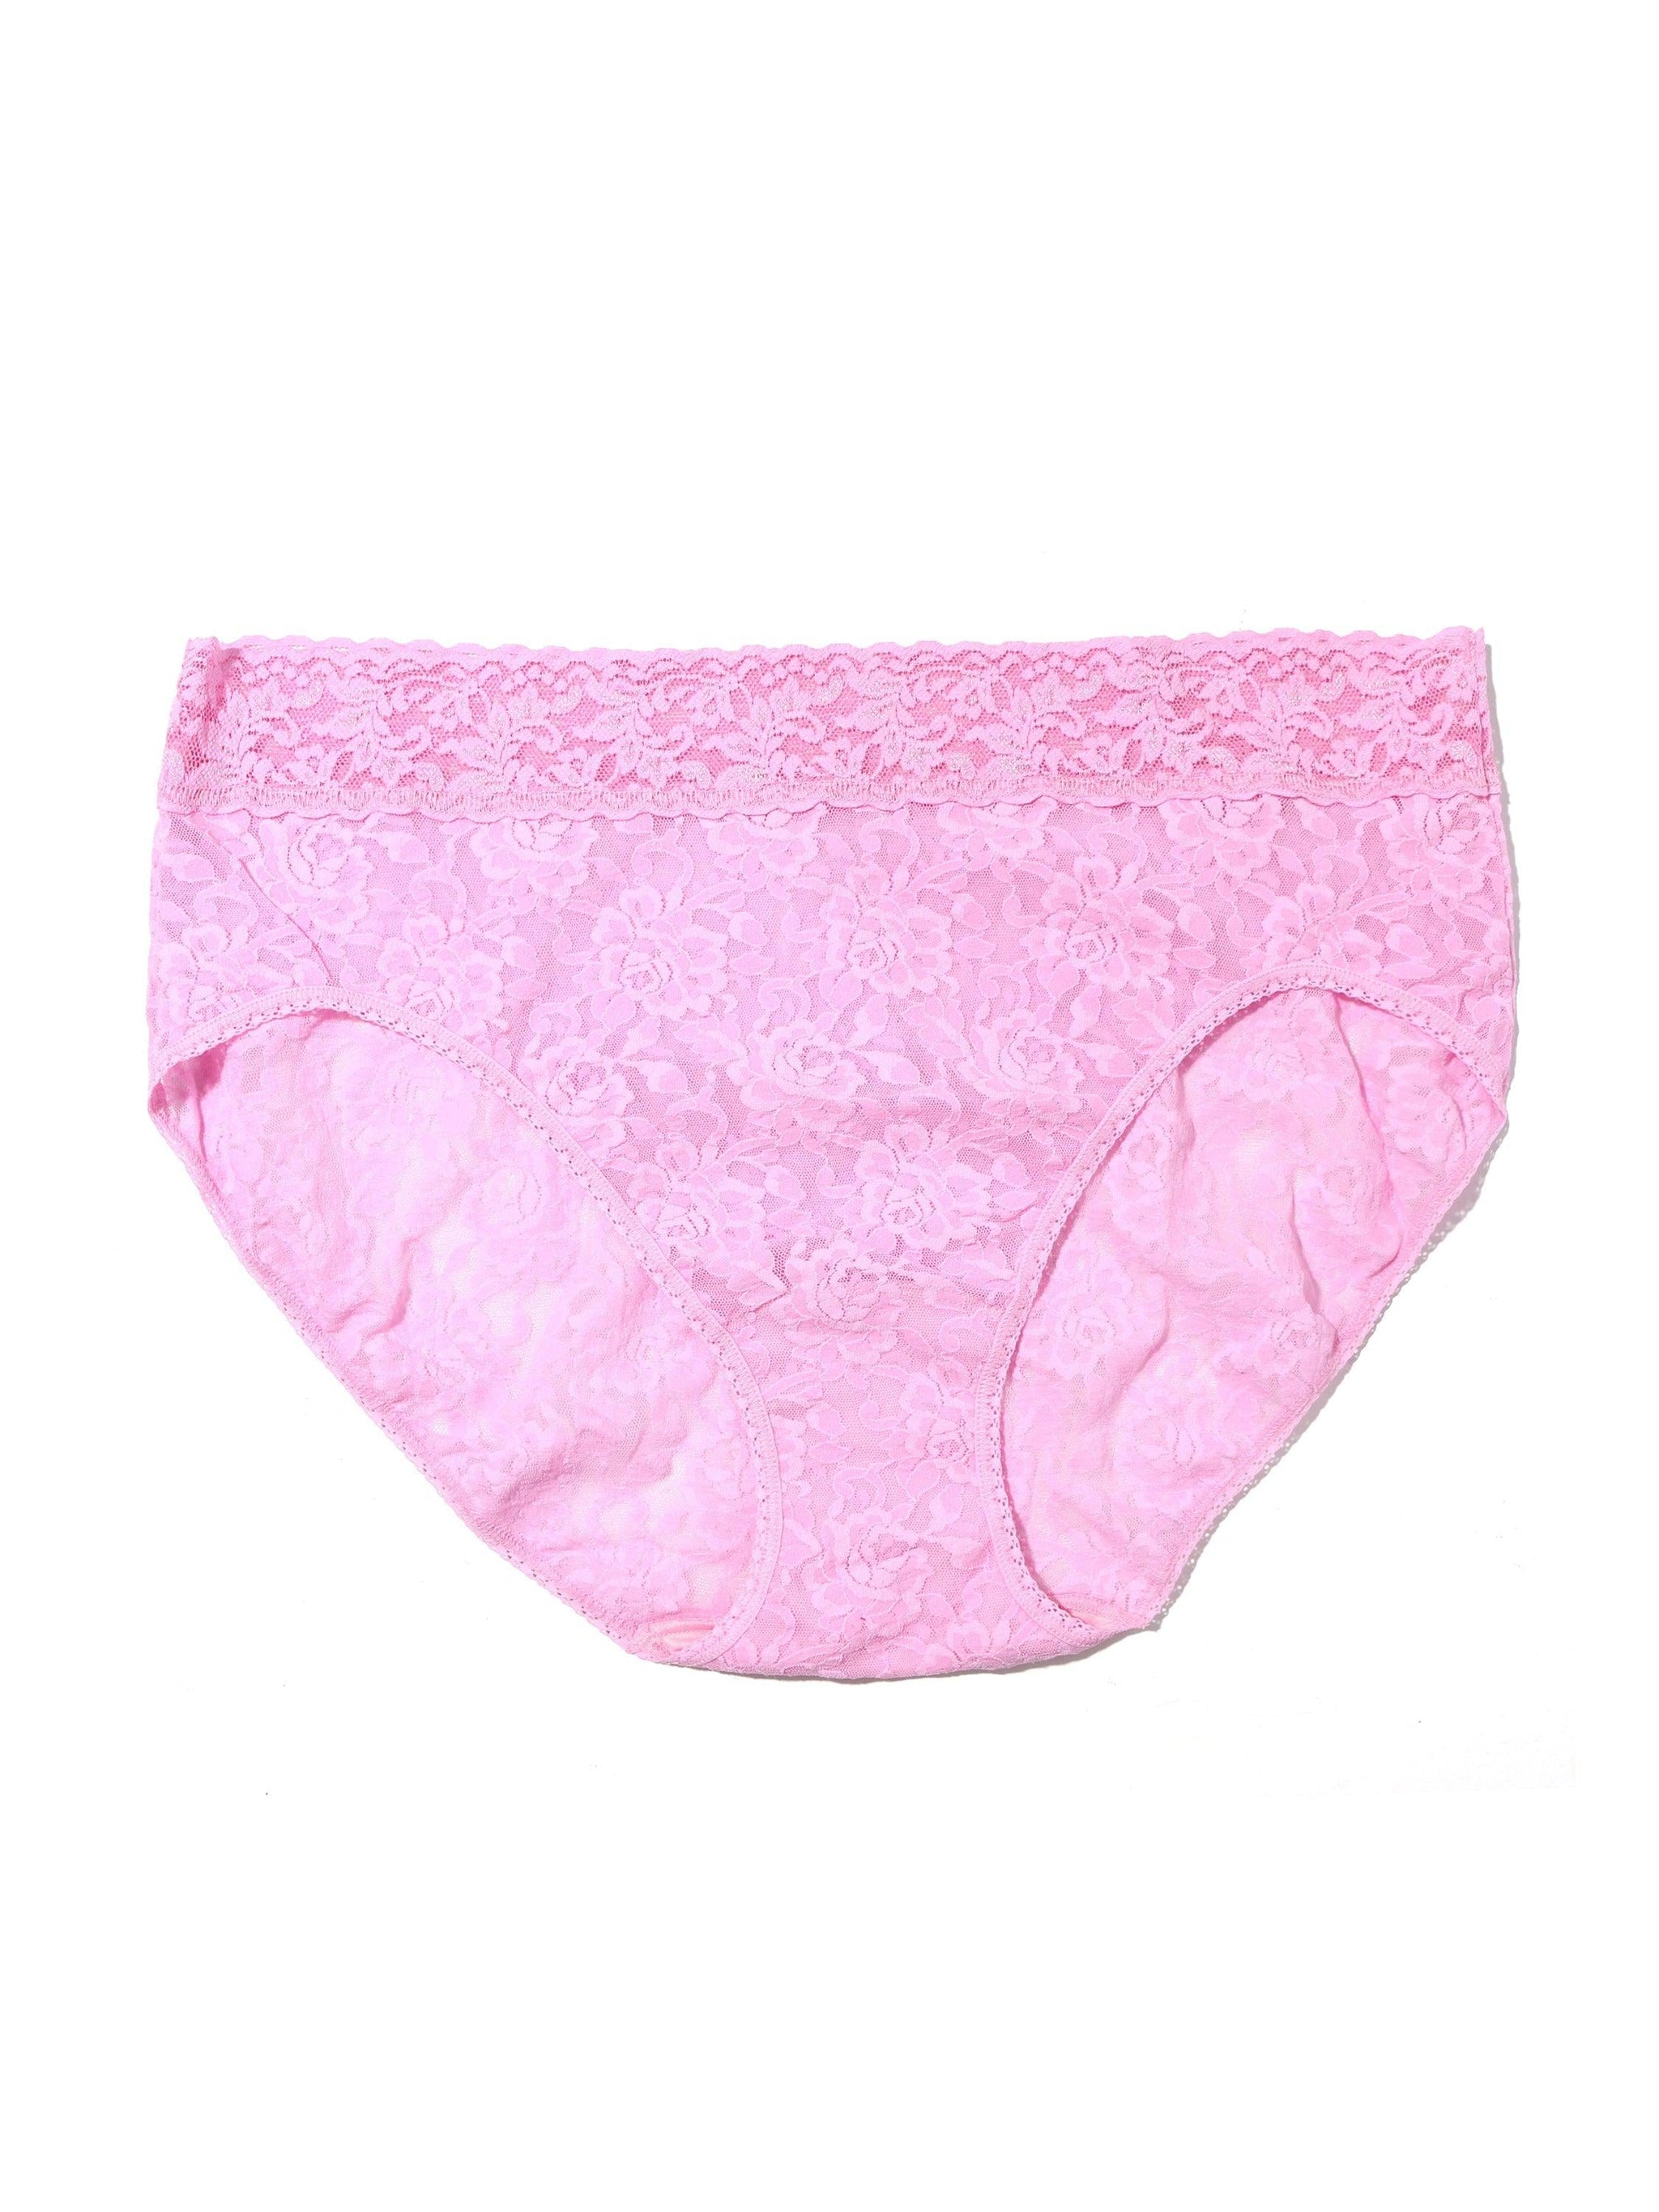 Plus Size Signature Lace French Brief Cotton Candy Pink